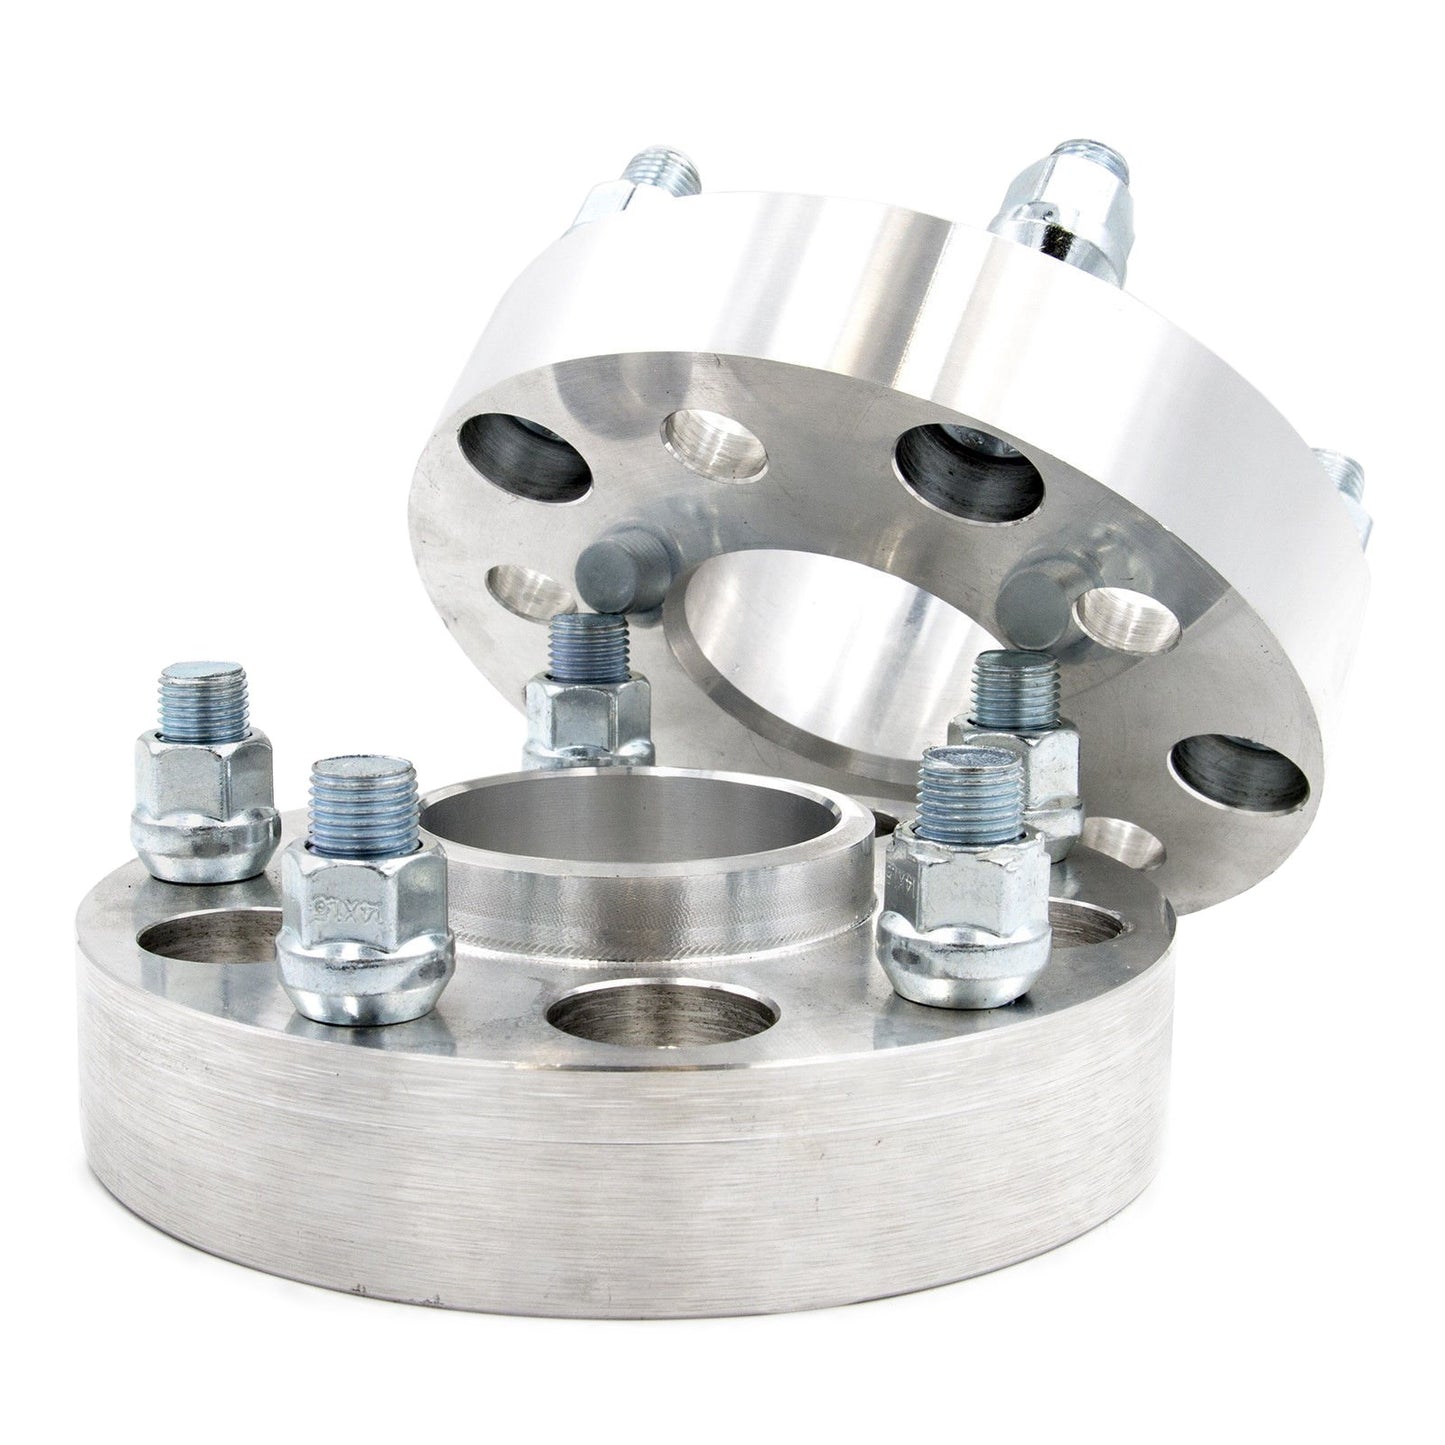 5x4.5" to 5x4.5" Hub Centric Wheel Spacer/Adapter - Thickness: 1" - 3"